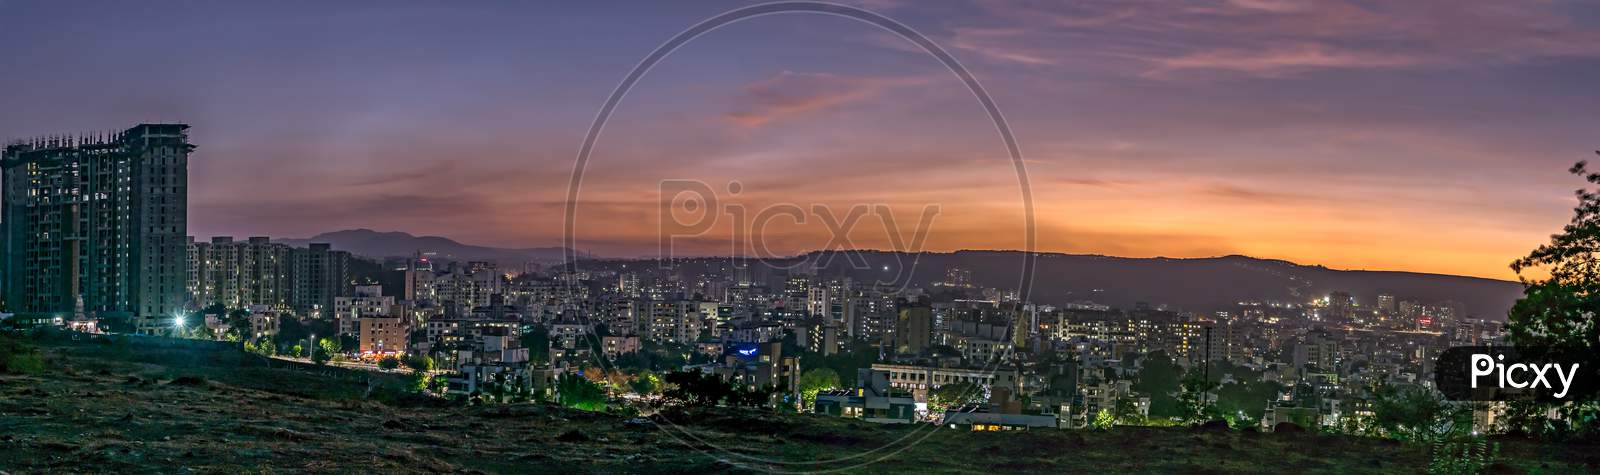 Panorama Image Of Beautiful Evening Sky In The City With Some Lights In Buildings. Can Be Used As Background.